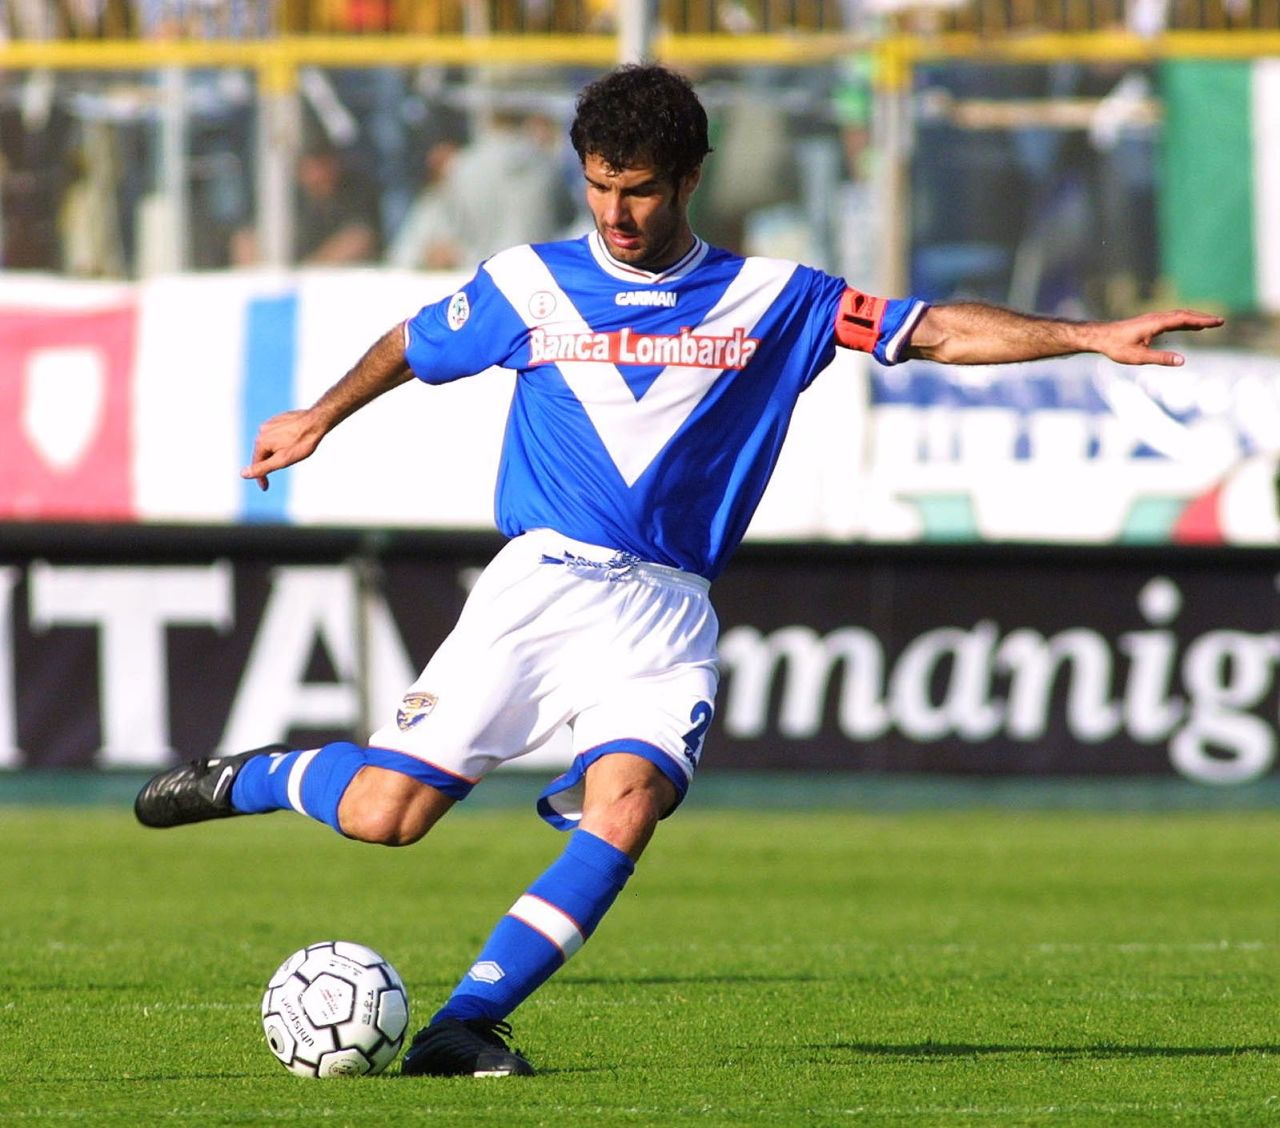 He had two spells at Serie A side Brescia either side of a brief time at Roma, and is pictured playing against Perugia in 2002.